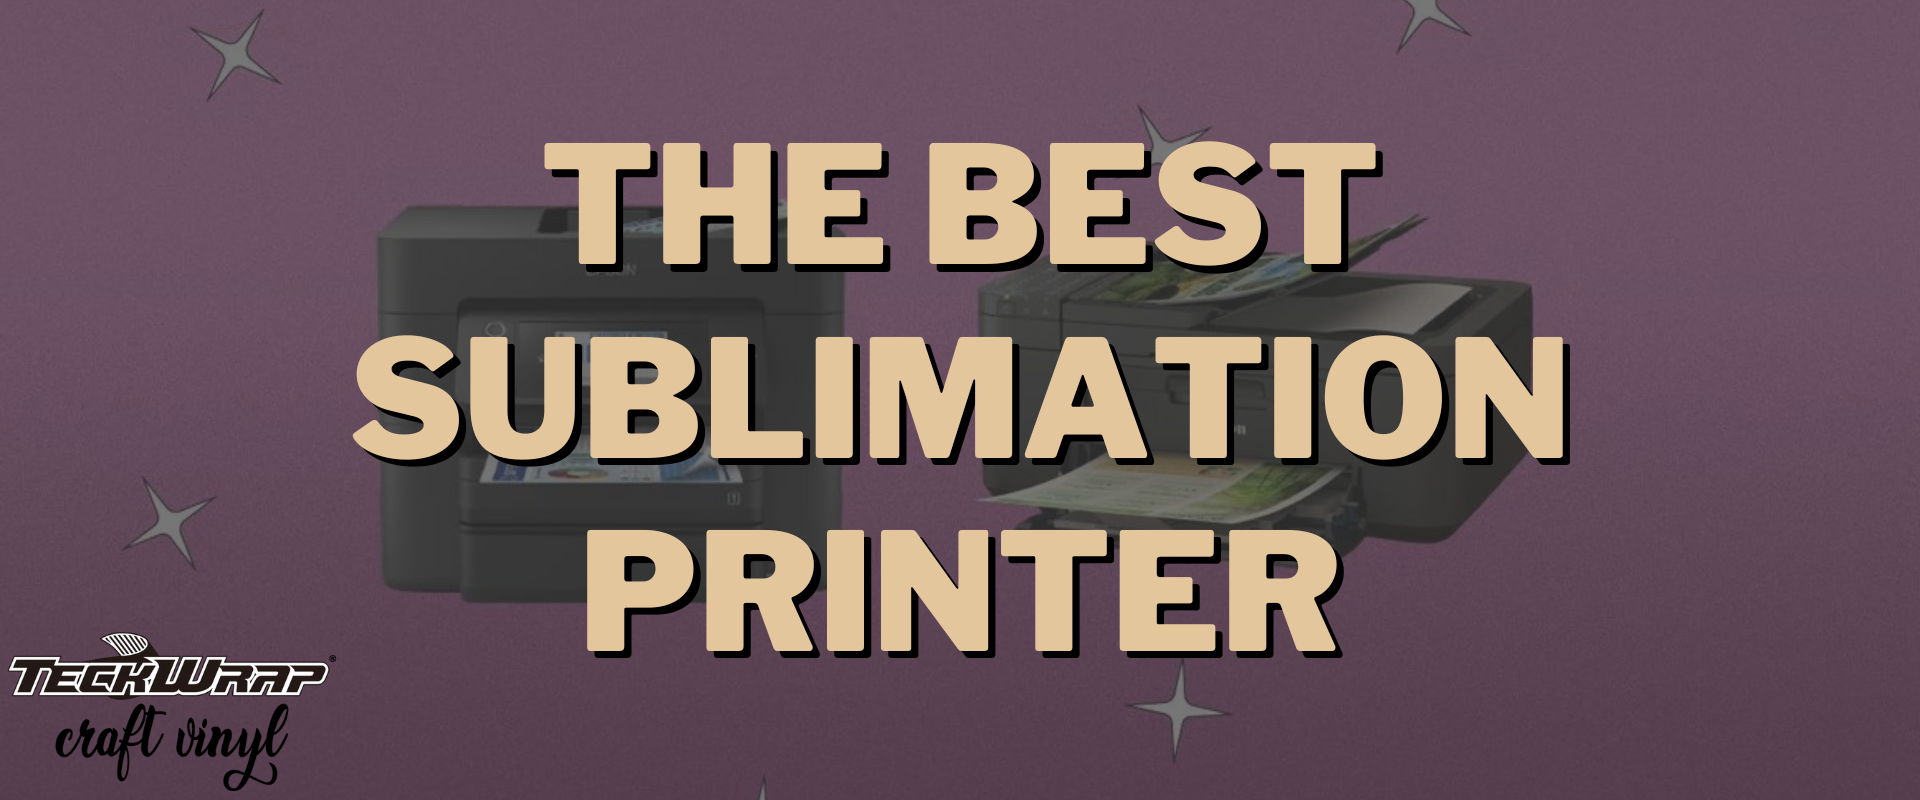 BEST SUBLIMATION PRINTERS FOR HEAT TRANSFER 